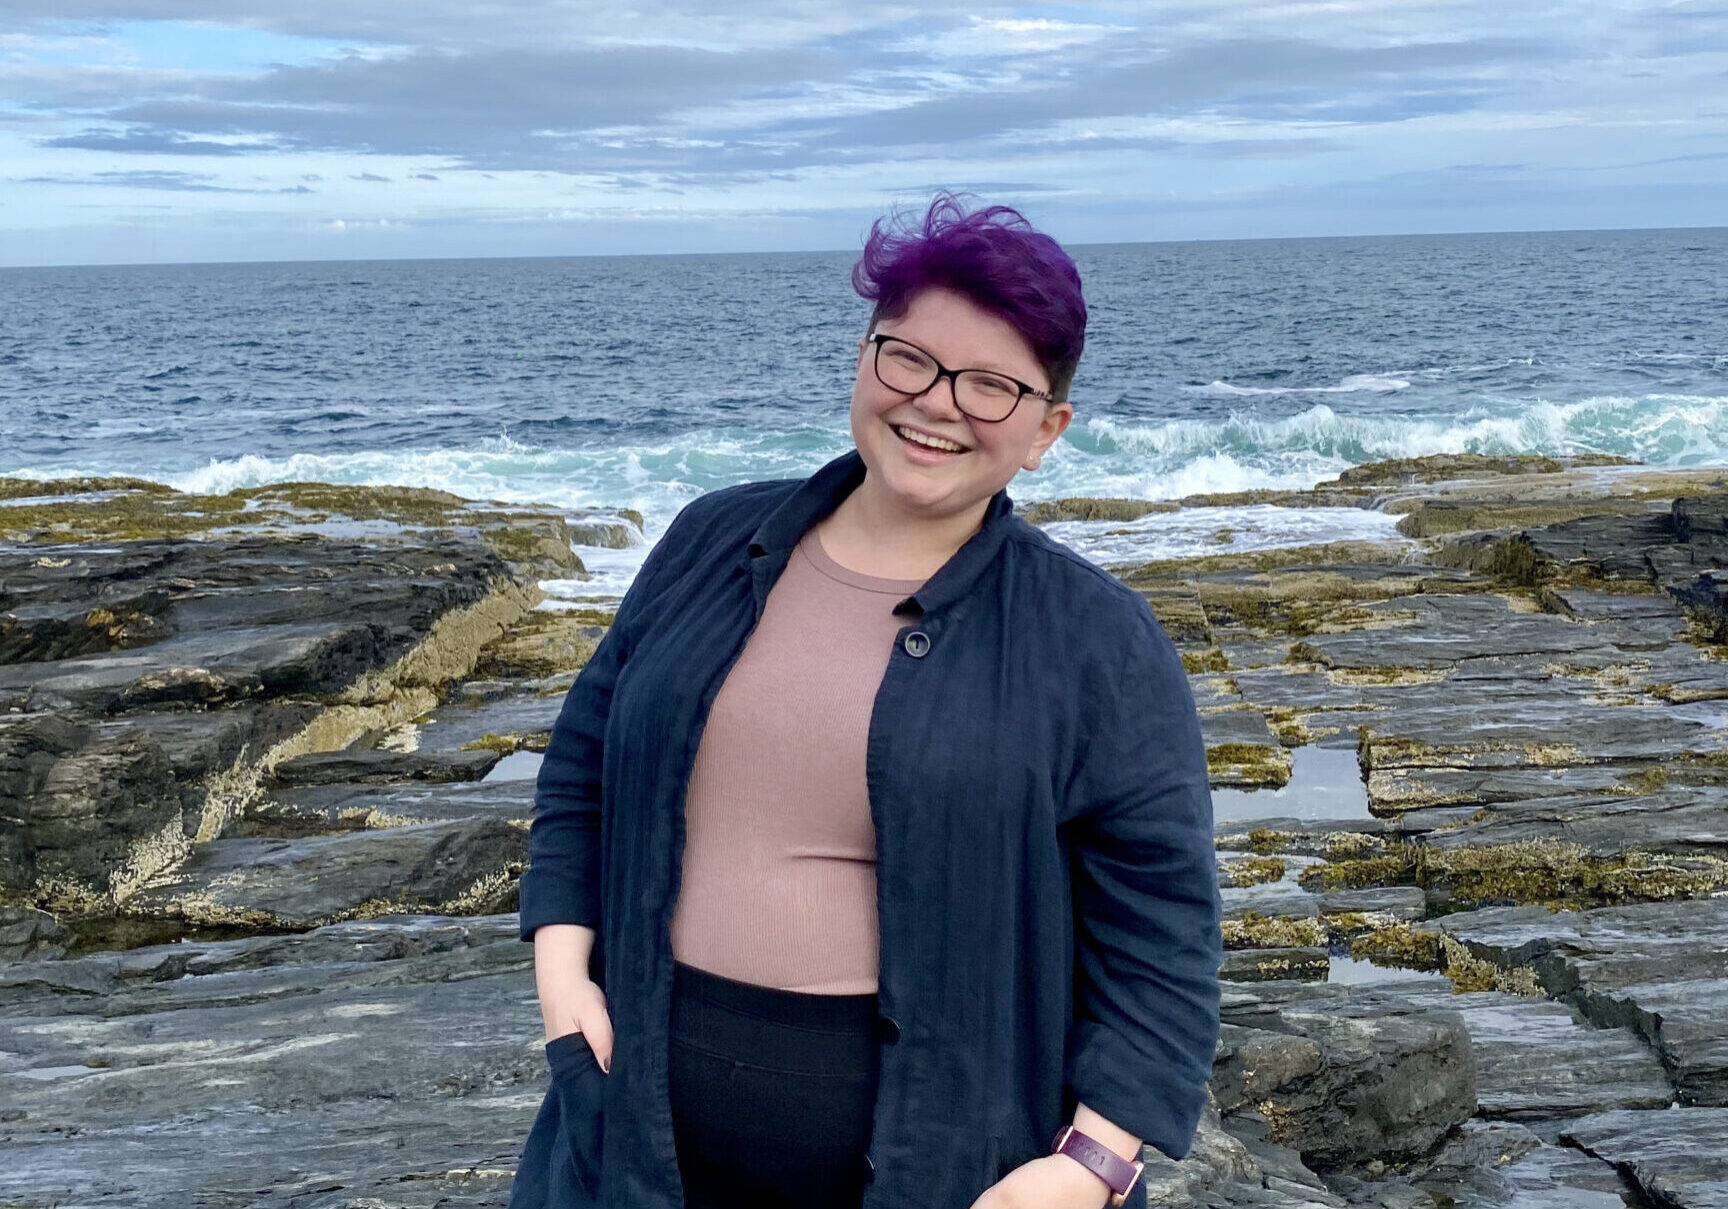 Sophia (the new TerraCorps member) at Cape Elizabeth, in a black cardigan sweater, purple shirt, and black pants. Her hair is also purple.